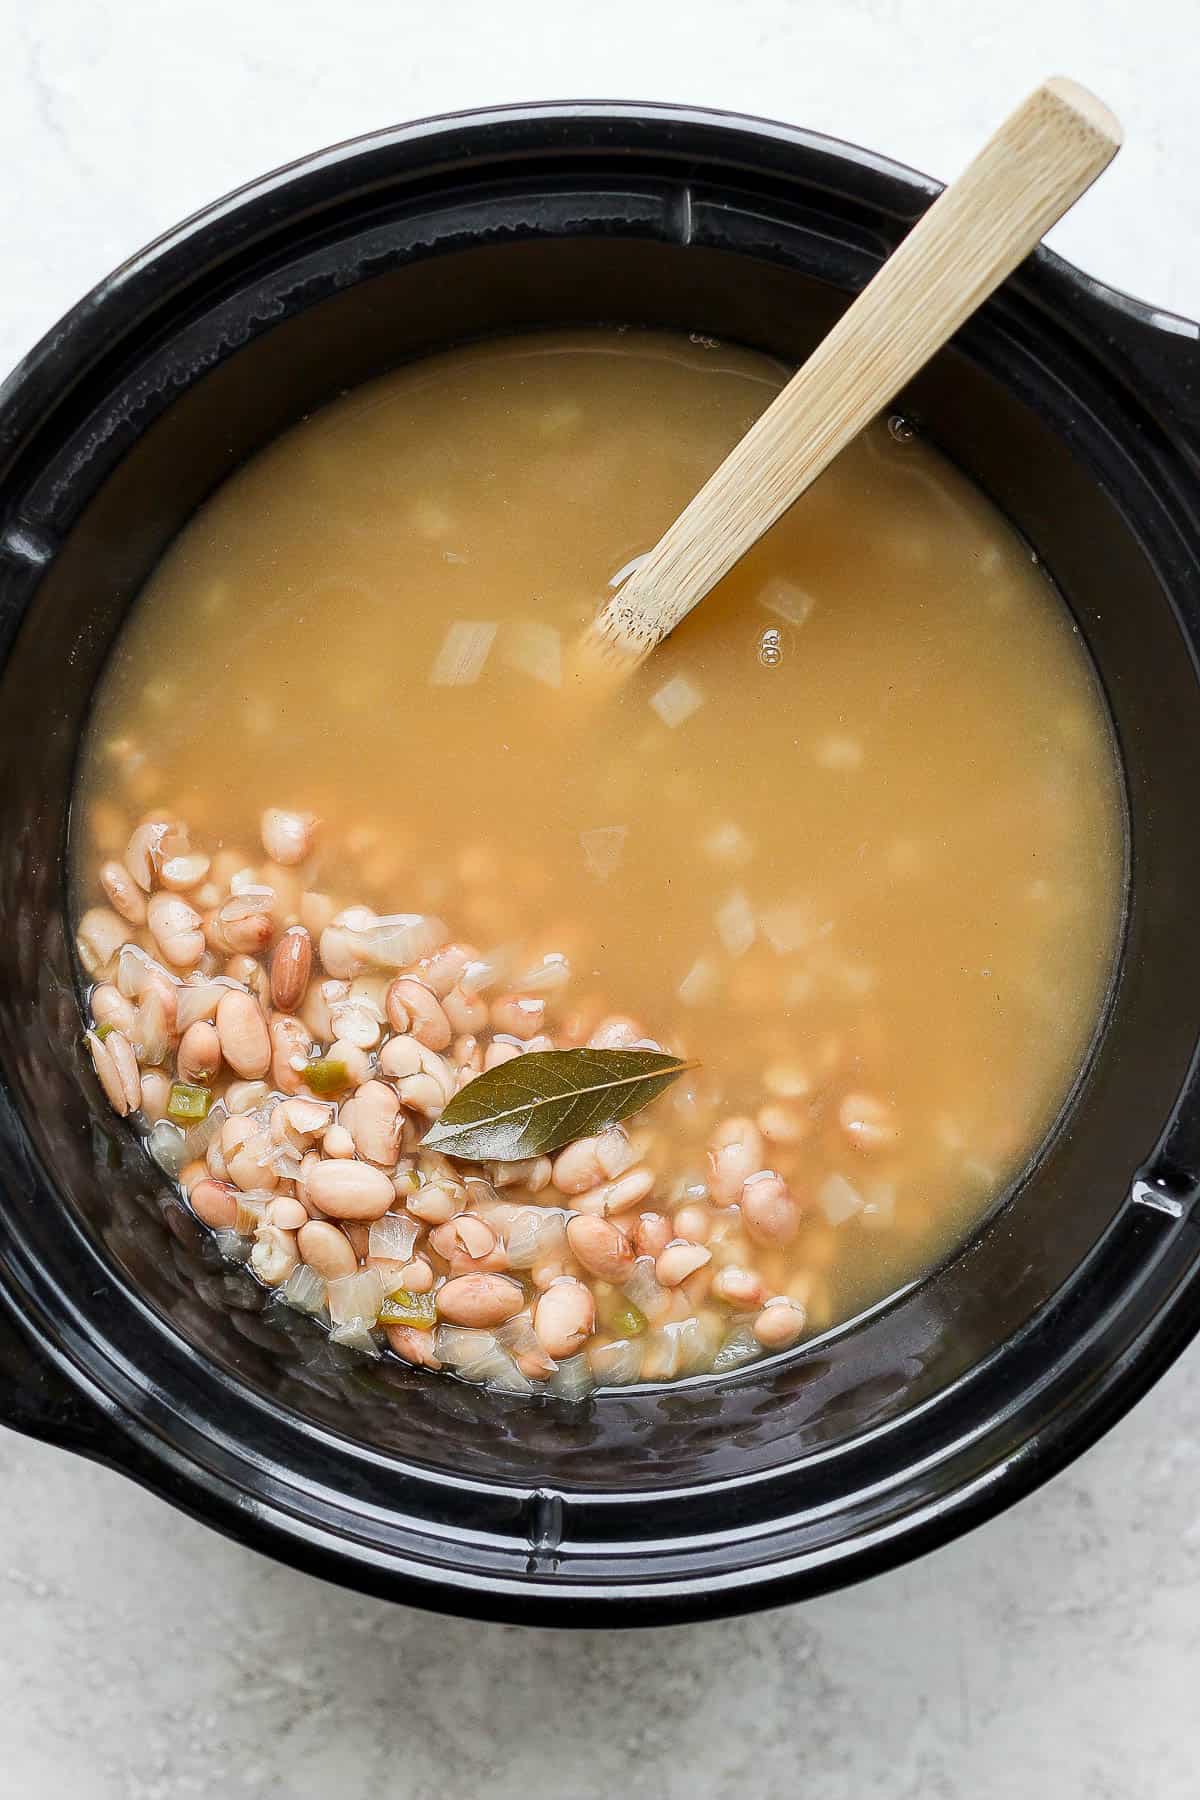 Cooked crock pot pinto beans ready to serve.